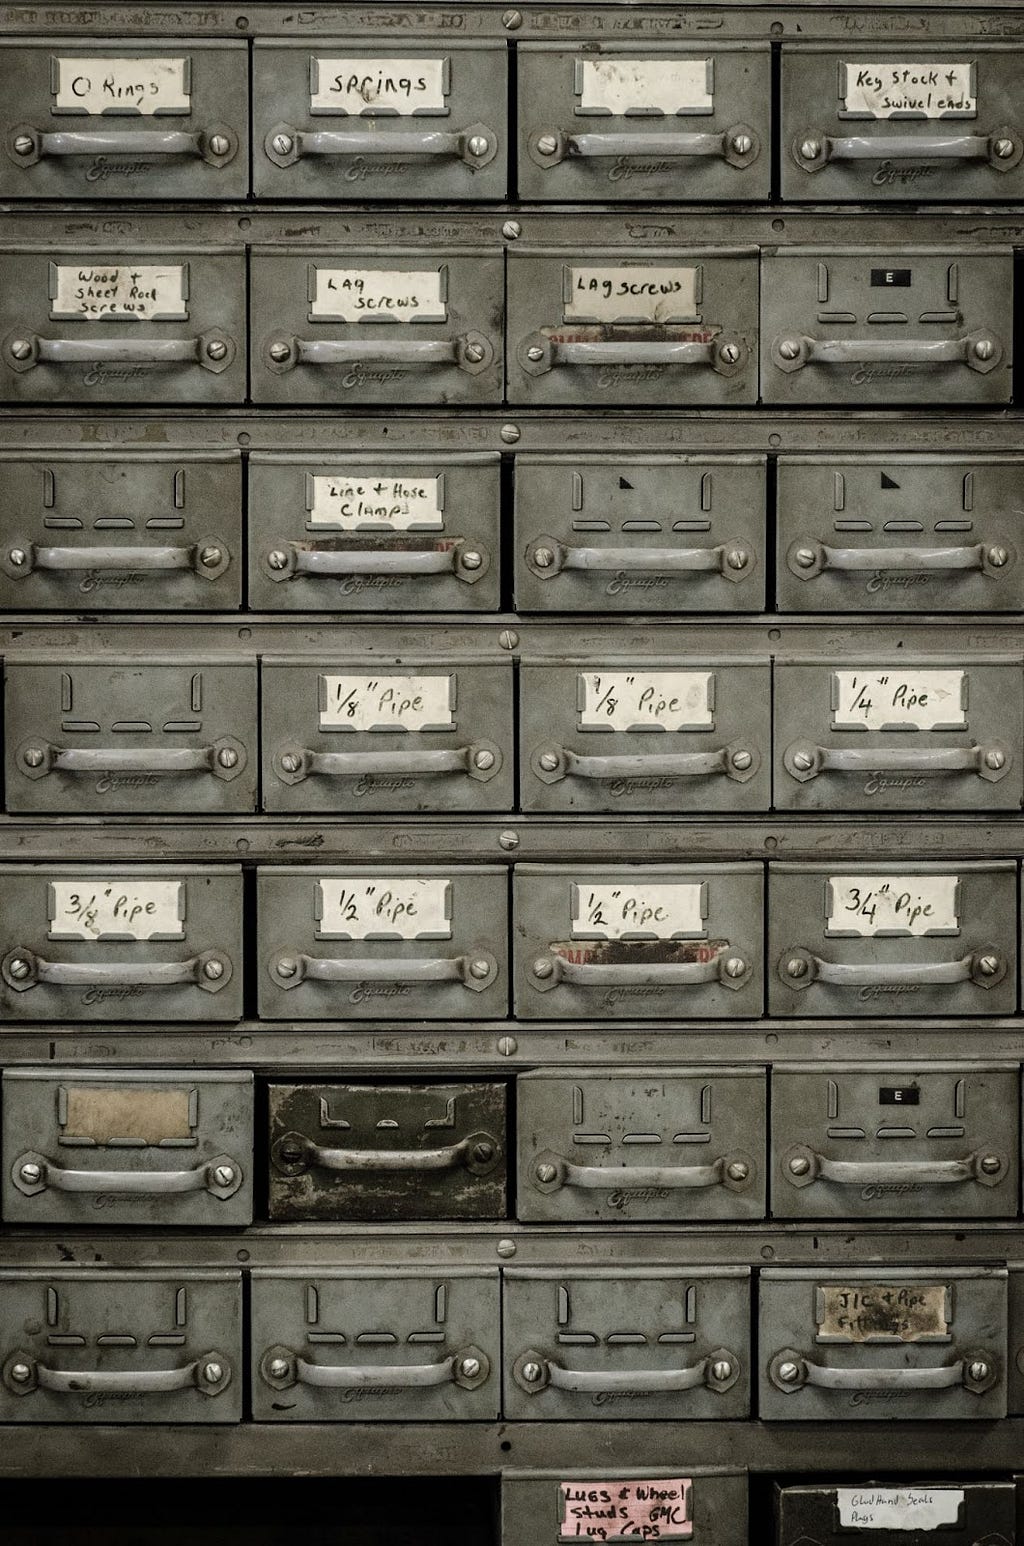 Old fashioned filing system